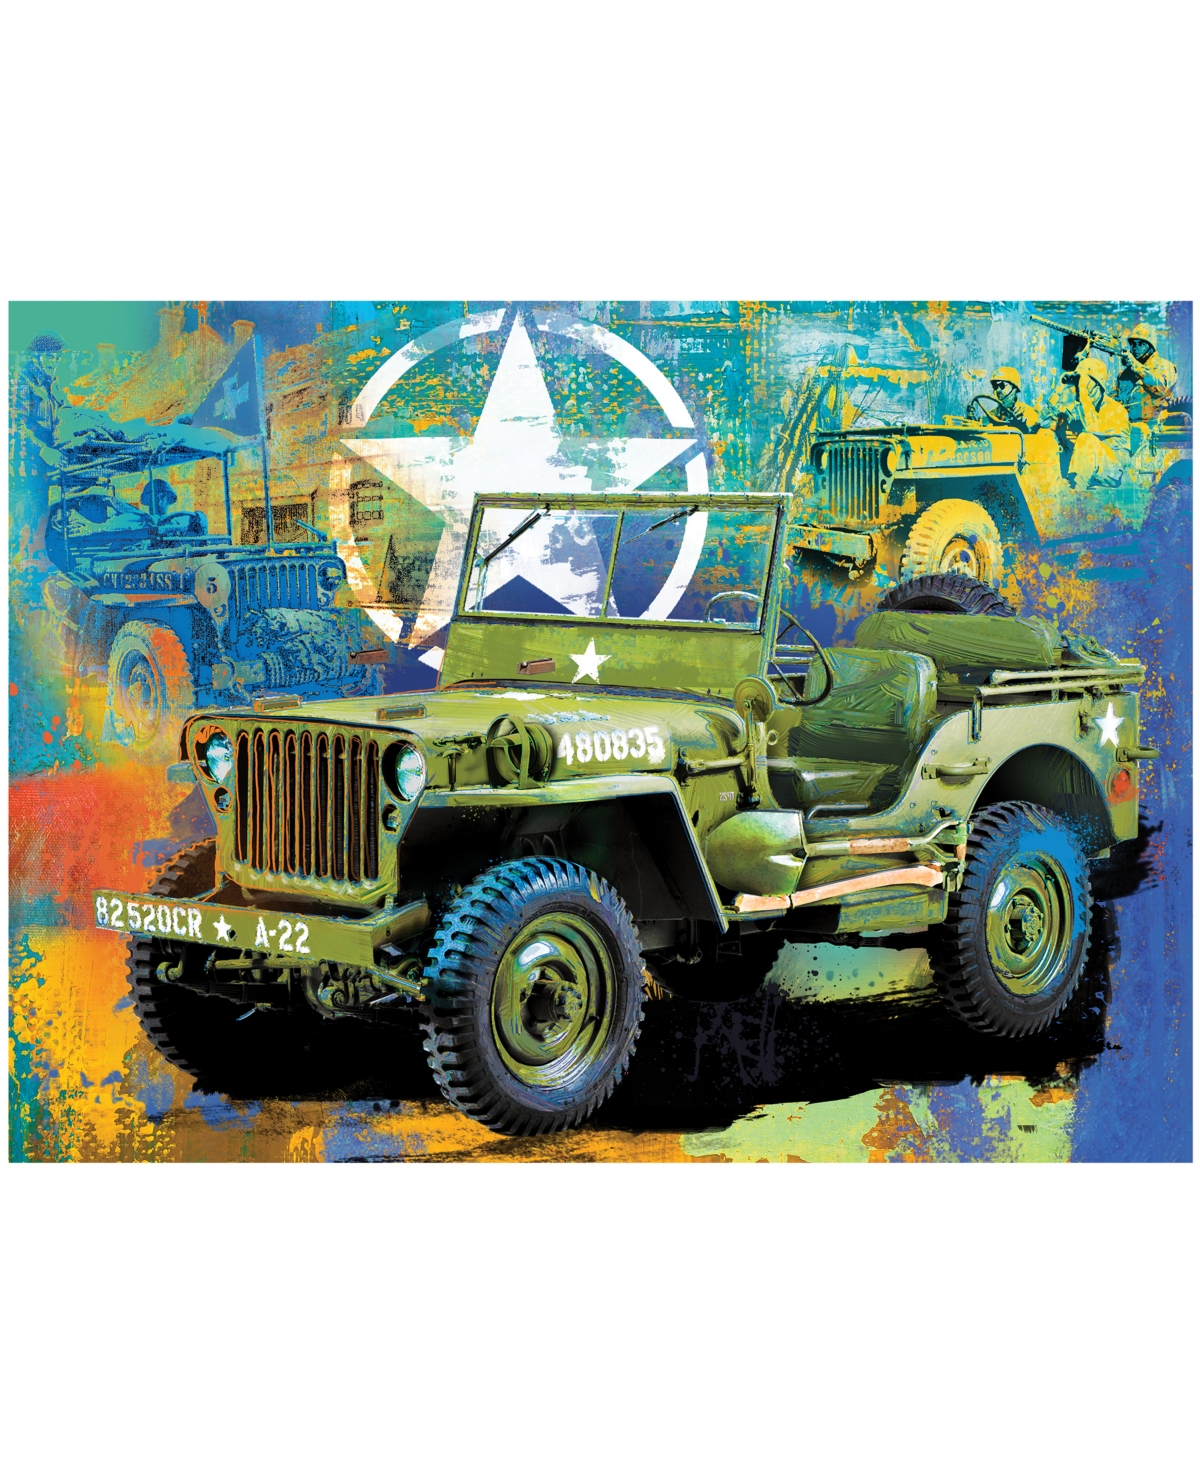 University Games Kids' Eurographics Incorporated The Jeep Army Truck Collectible Shaped Tin Puzzle, 550 Pieces In No Color